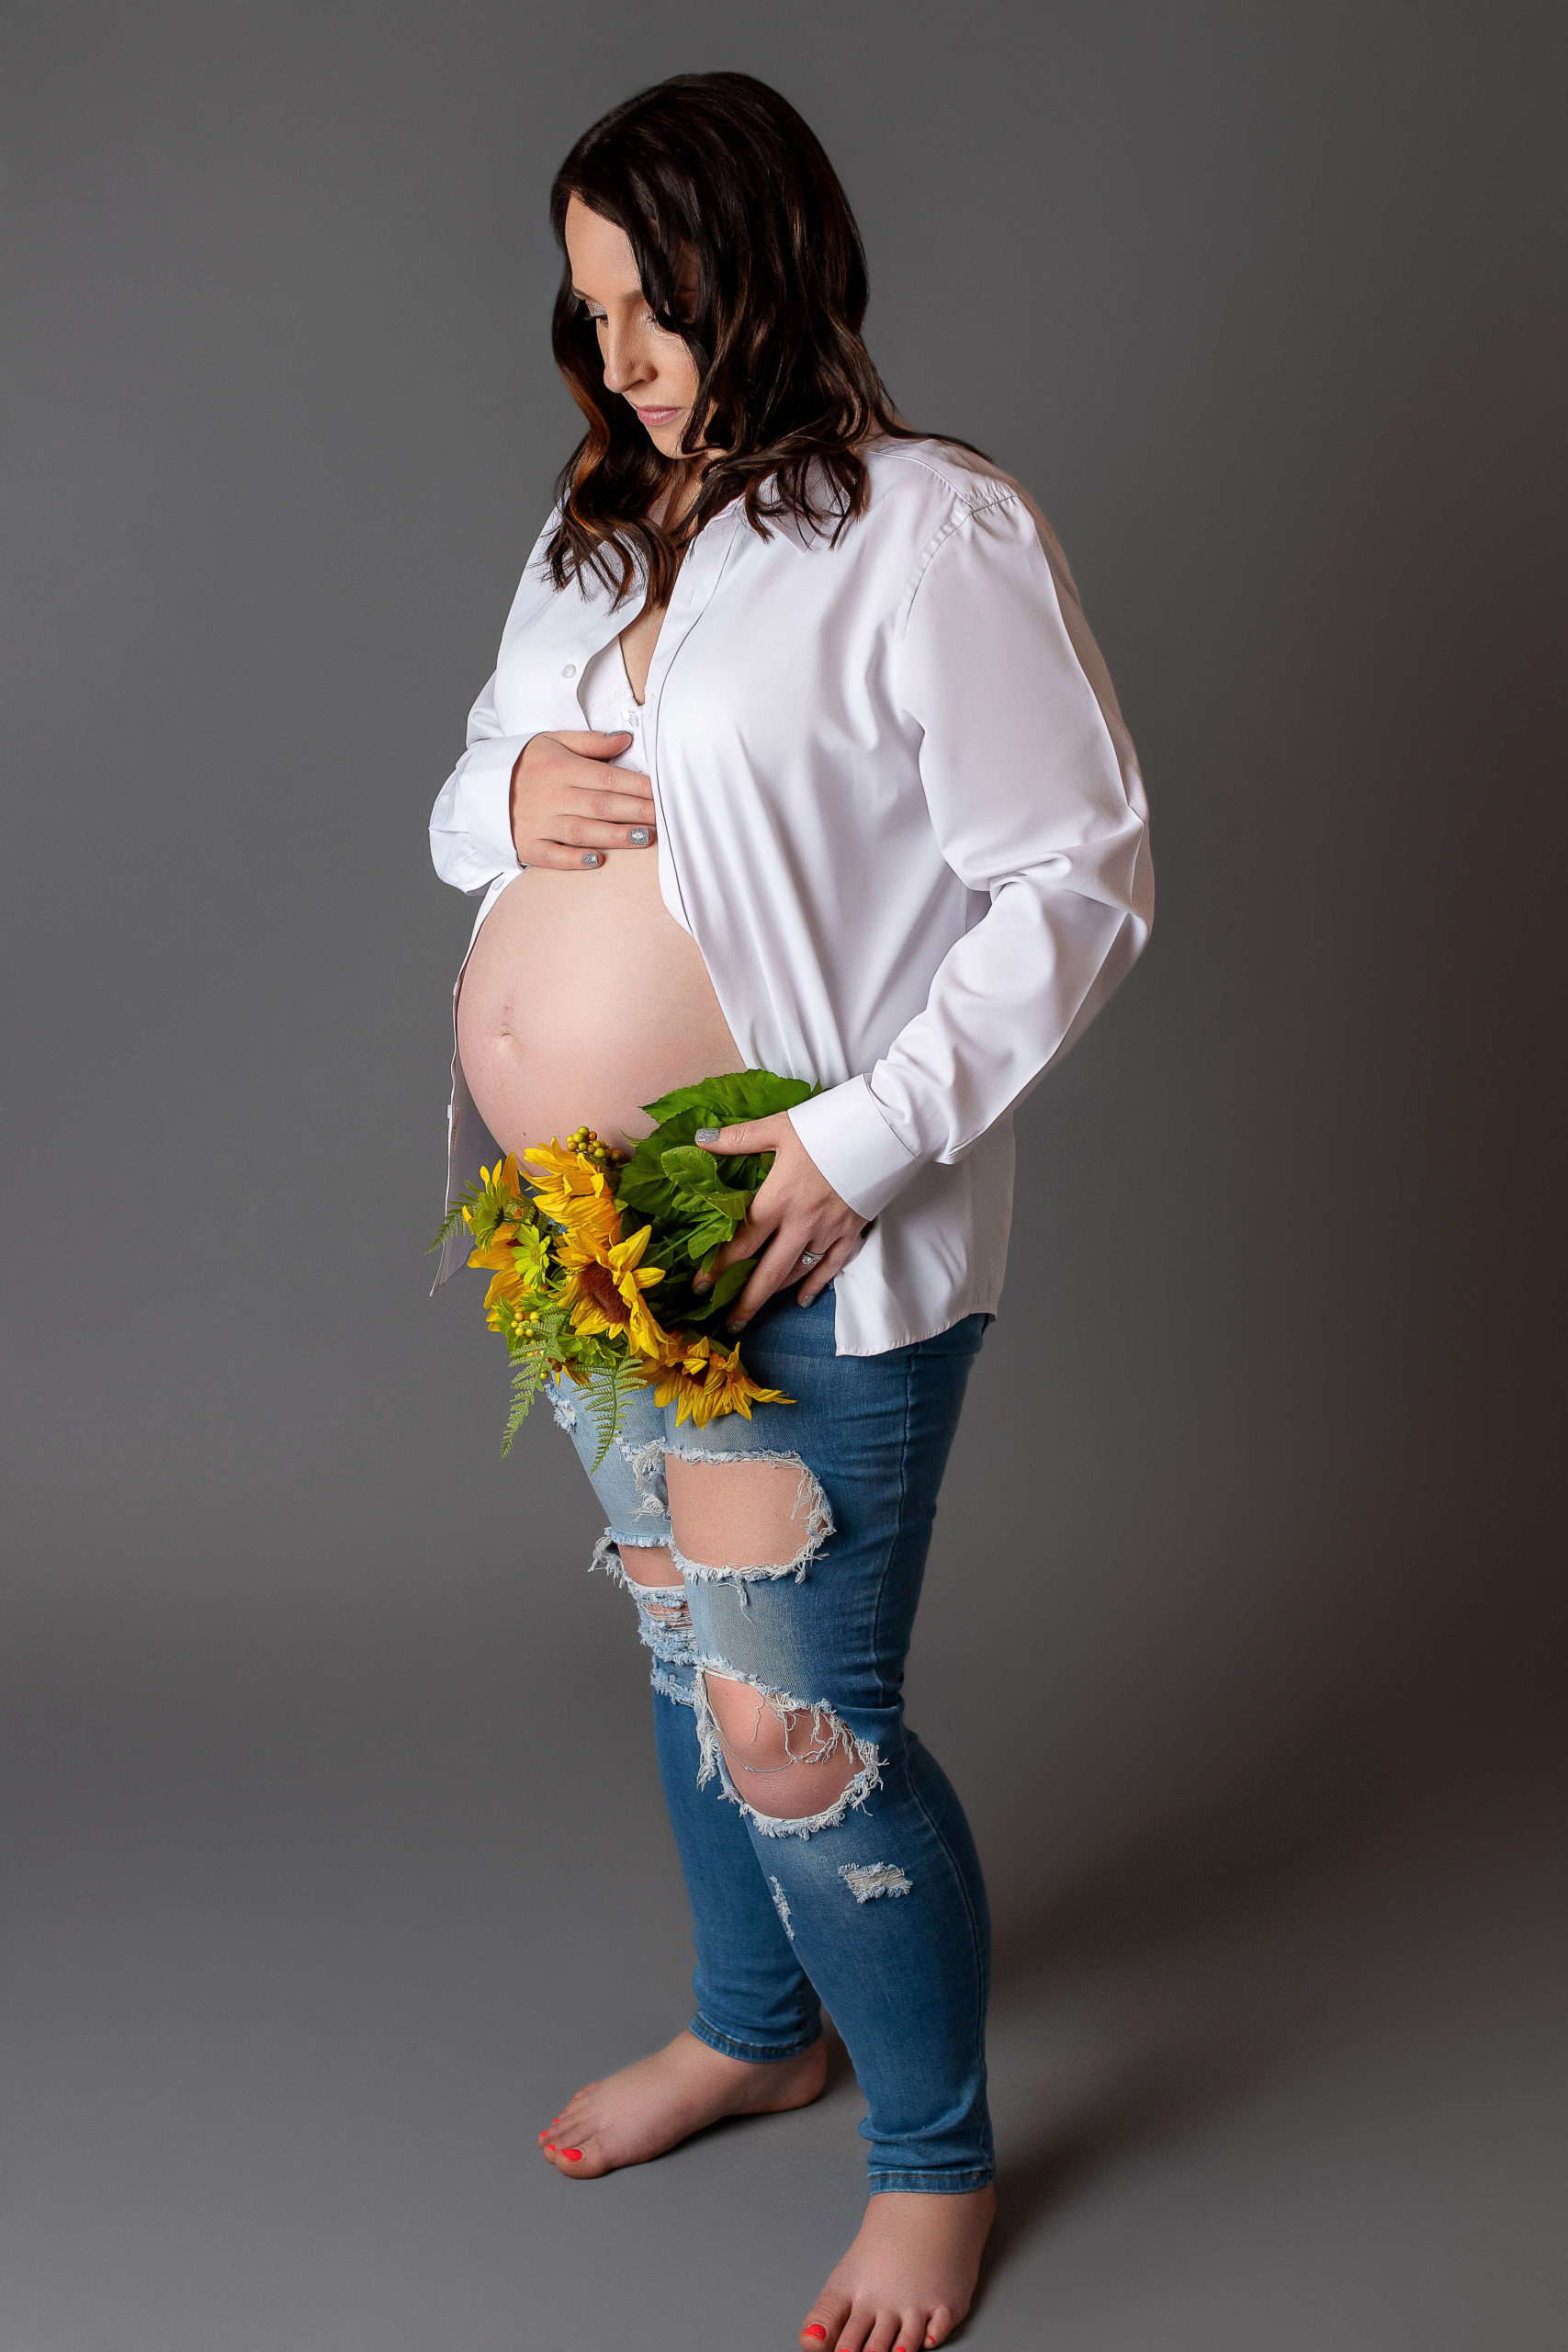 Women holding sunflowers up to her belly New Life Birth Services